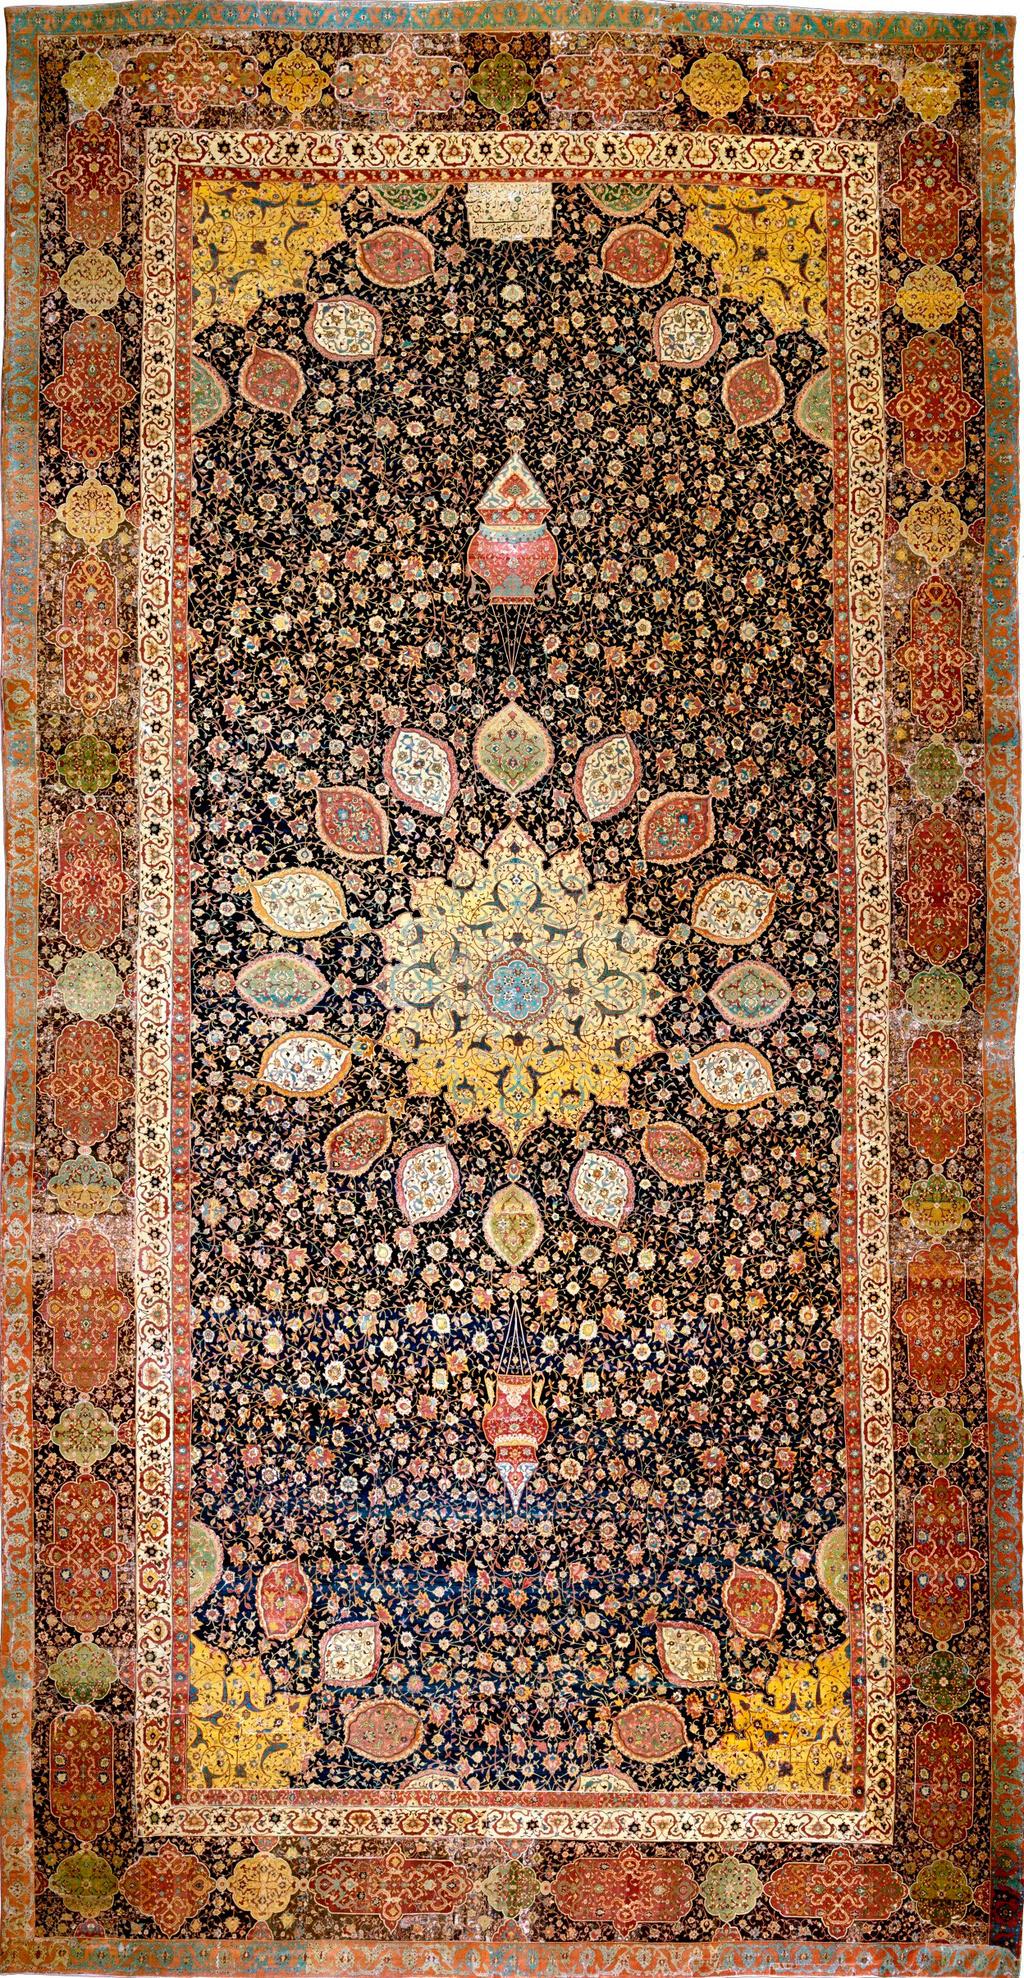 The Ardabil Carpet, probably the finest